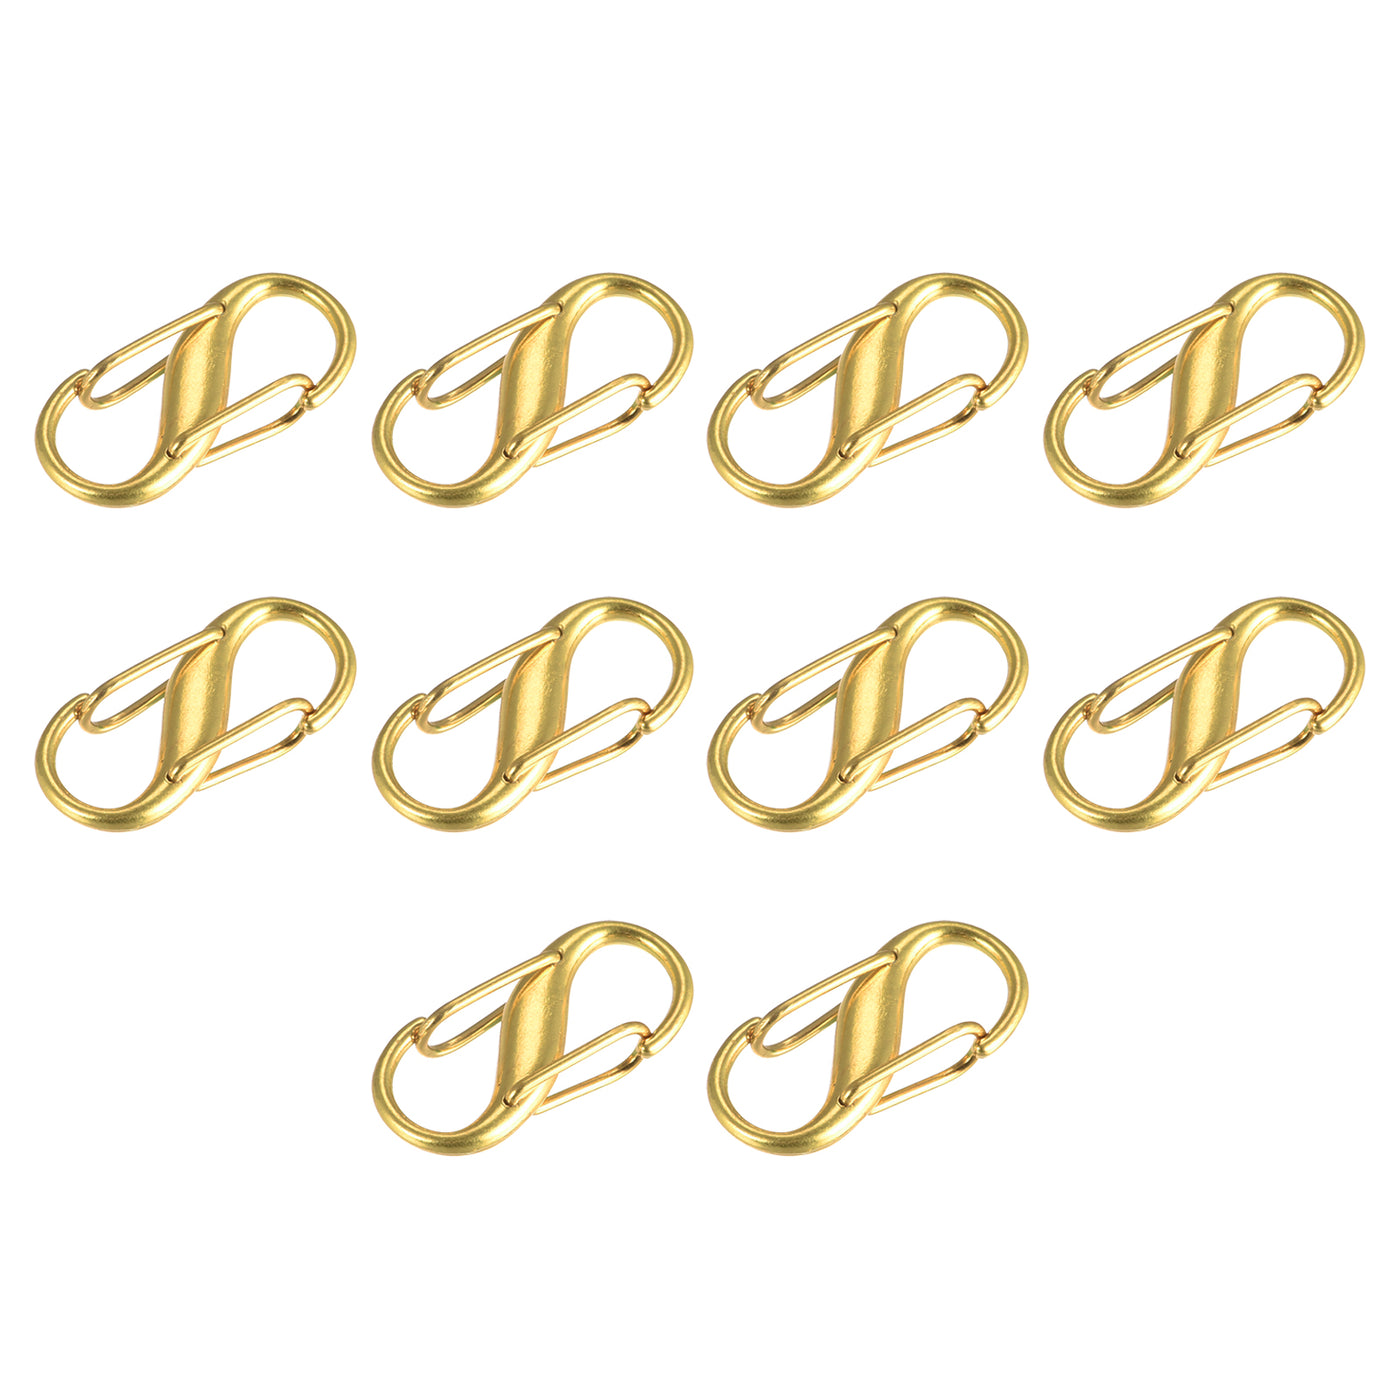 uxcell Uxcell Adjustable Metal Buckle for Chain Strap, 10Pcs 27x13mm Chain Shortener Dark Gold